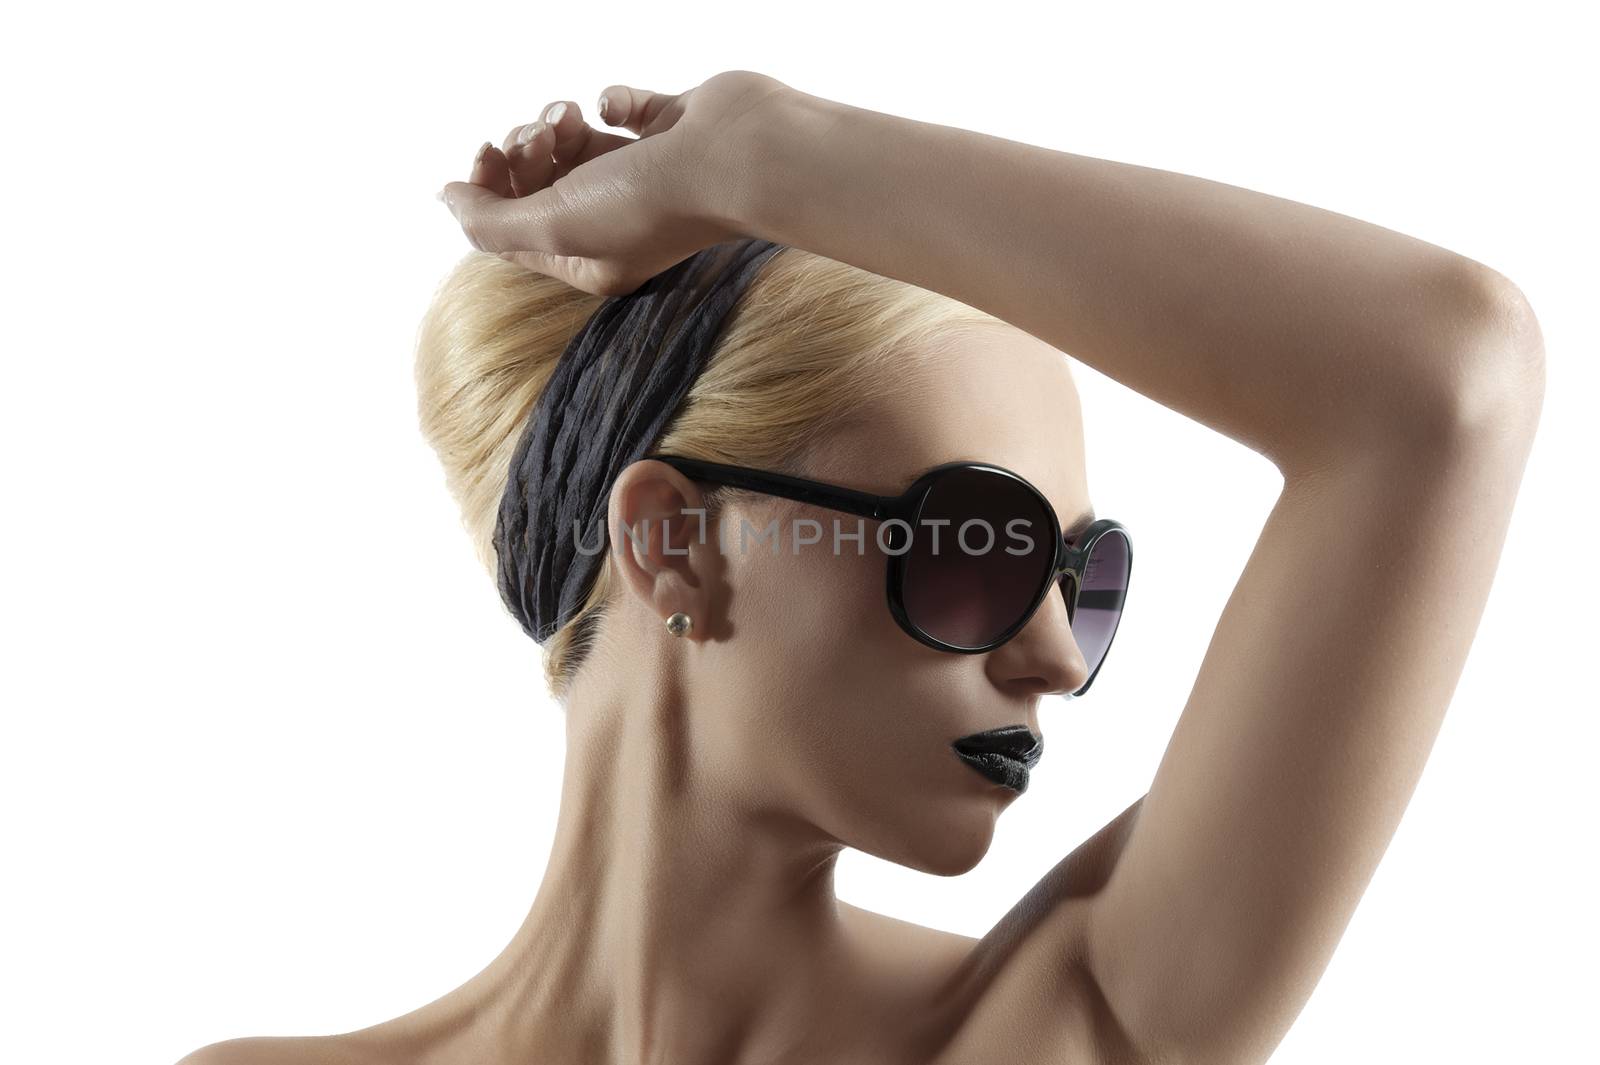 fashion portrait of young blond woman with hair style black lips and wearing sunglasses posing against white background